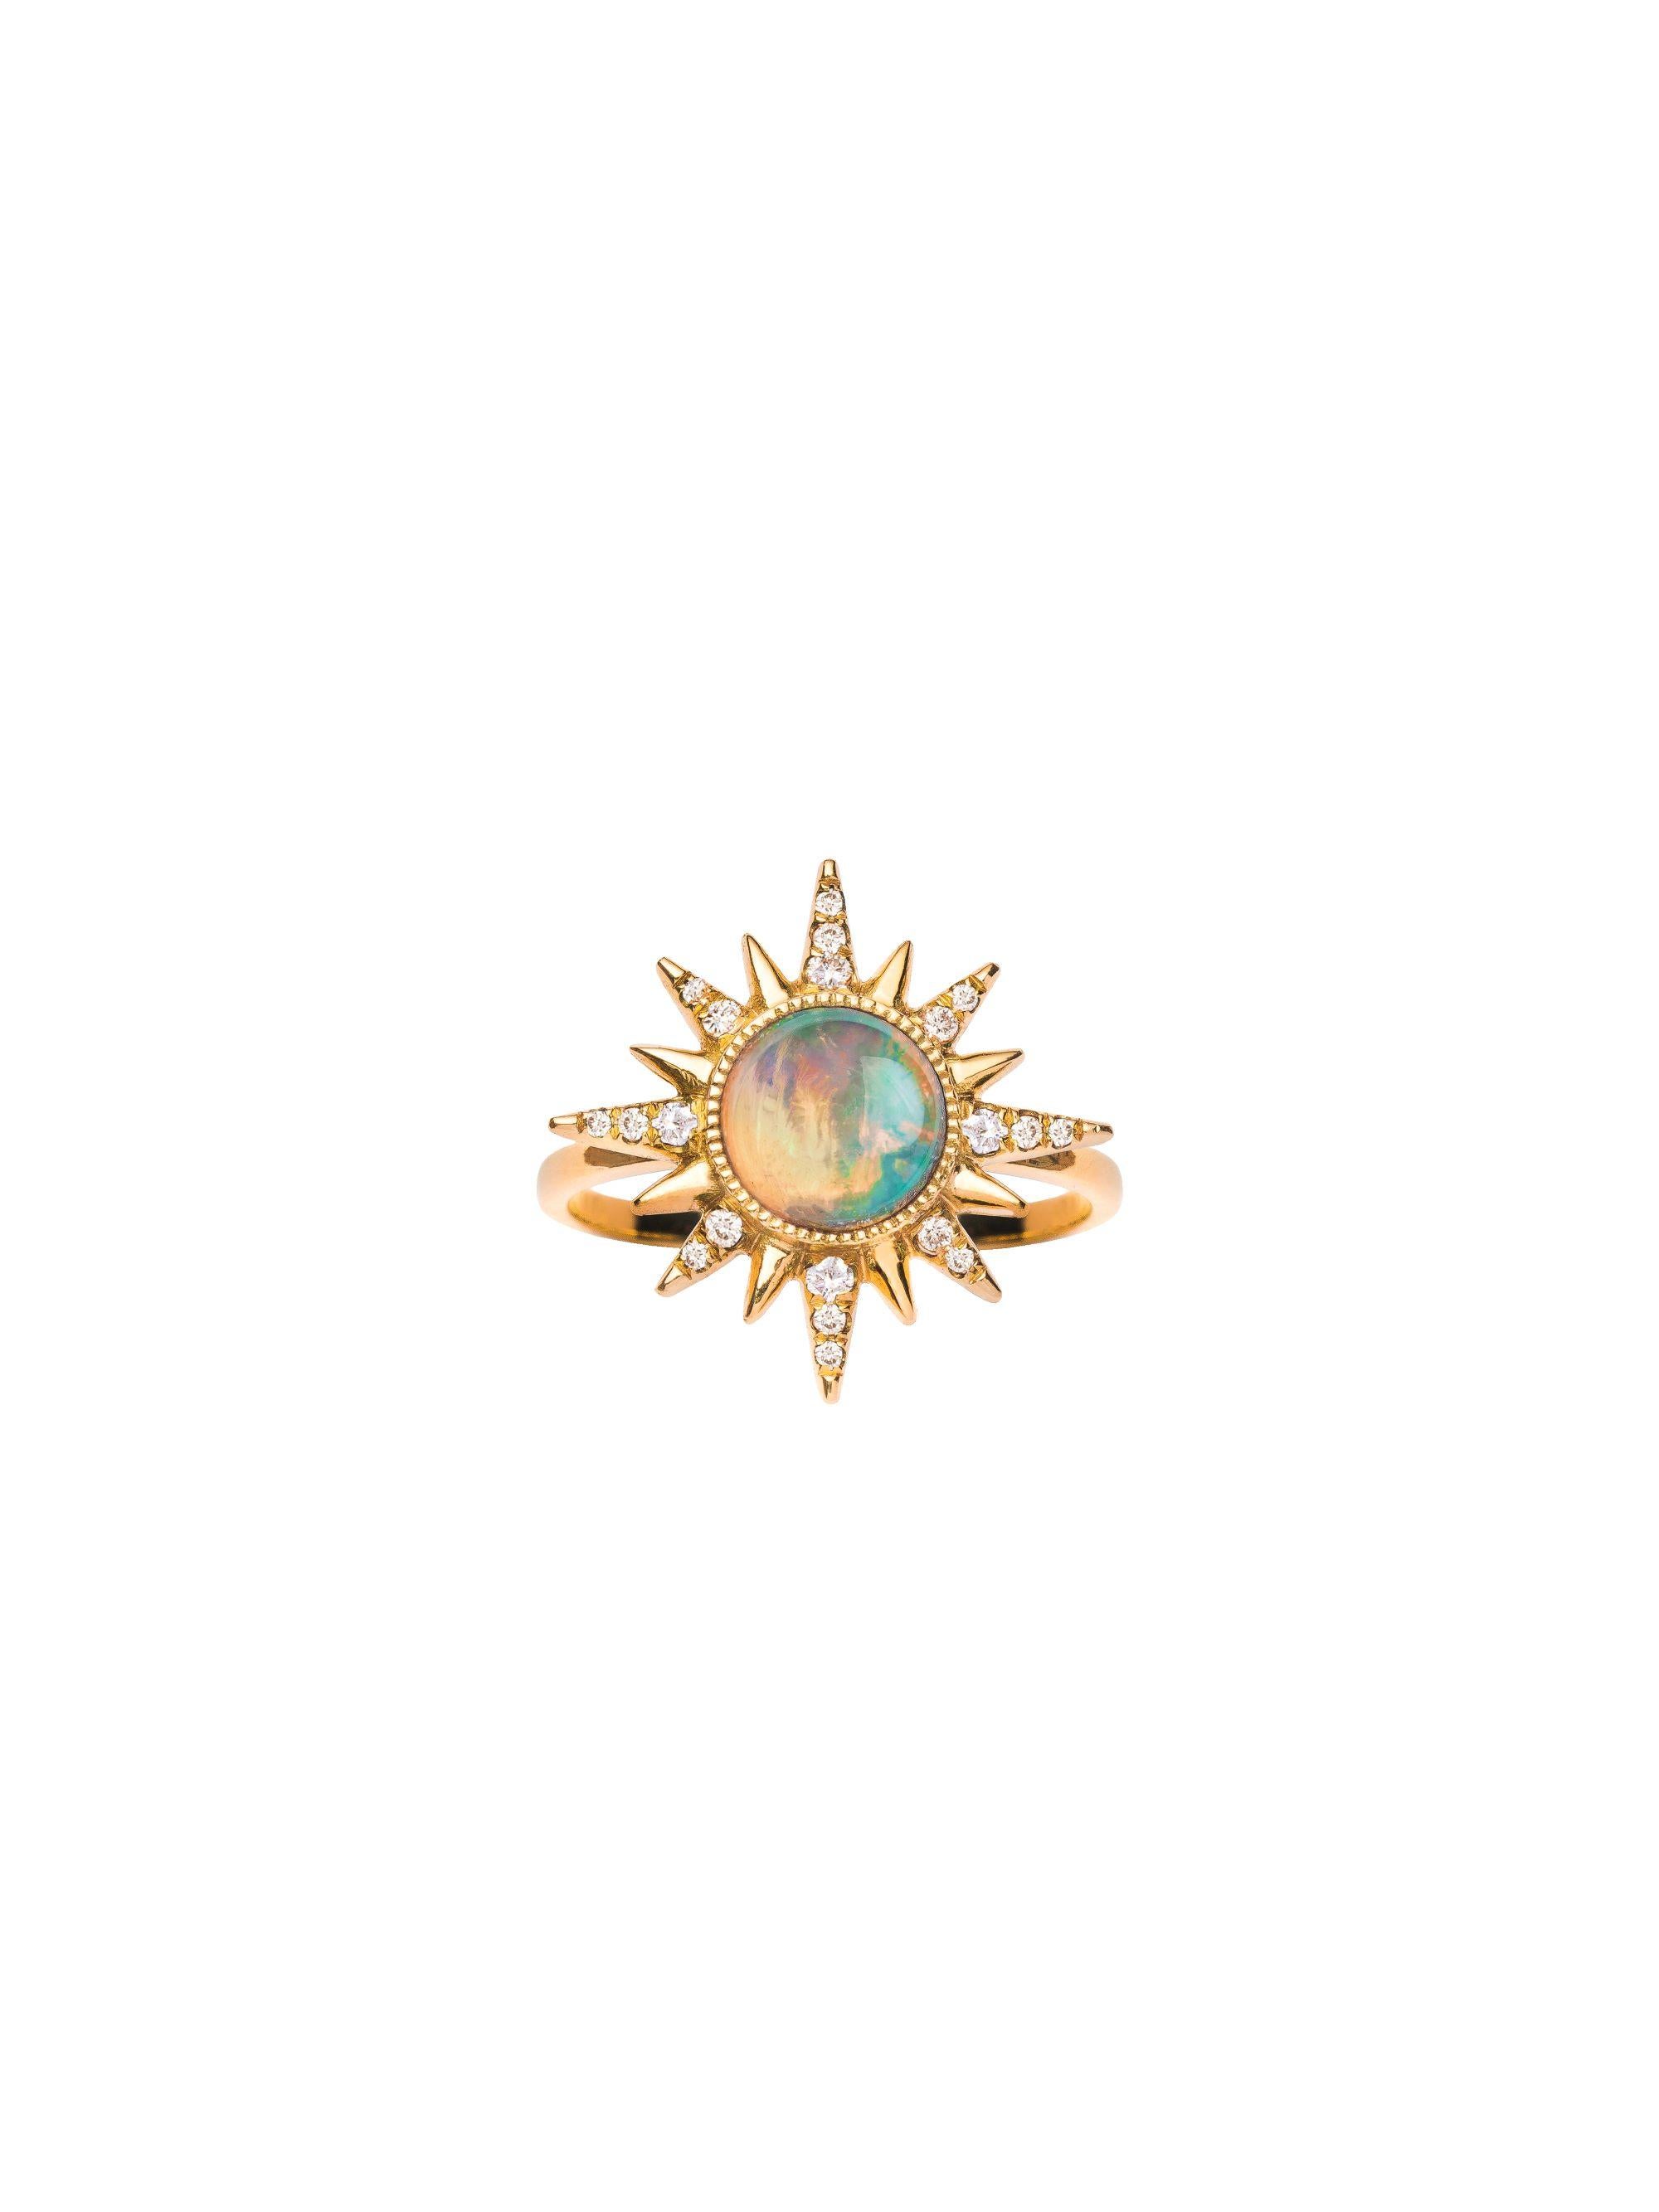 Electra Maxima Ring

18kt rose gold, 1.30 ct Ethiopian Opal round cabochon, 0.17 ct White Diamonds, 5.25 gr total gold.
Sizes between 48 and 56.
Handmade in Italy.
*Due to Covid-19 situation, we may have delivery delays.

Item part of our Pleaidee